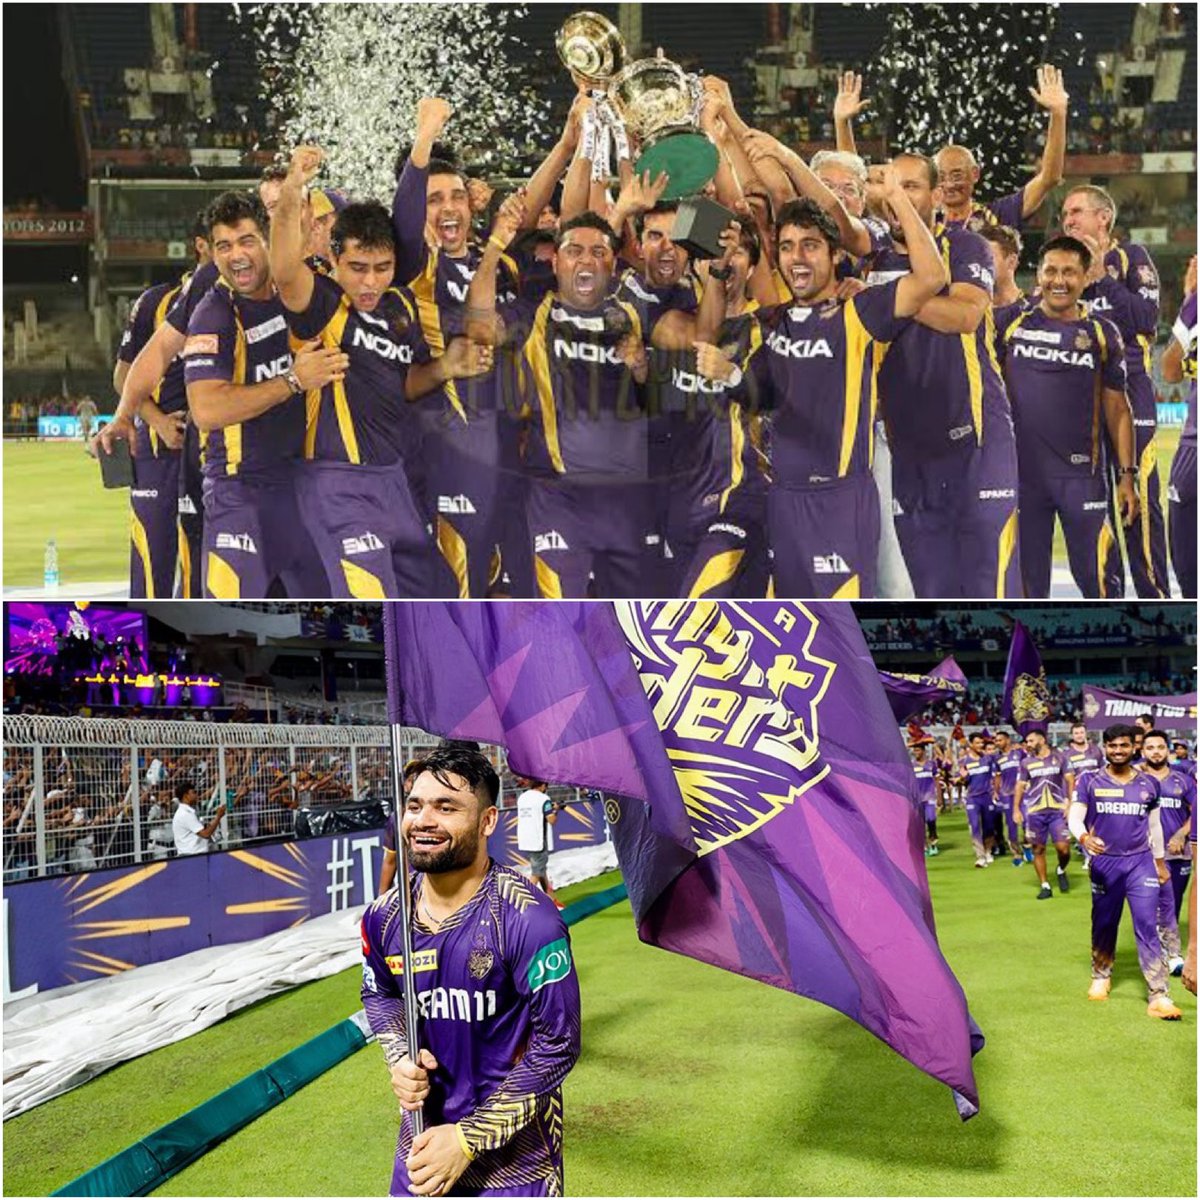 KKR in IPL 2012 🤝 IPL 2024

• Gambhir ✅
• final at Chepauk
• defeated Dada at Eden 
• defeated MI at Wankhede
• CSK defending champions
• broke bank for overseas player
• 2nd season for KKR captain (ex-Delhiplayer)

• A league match abandoned due to rain
 
#GTvKKR